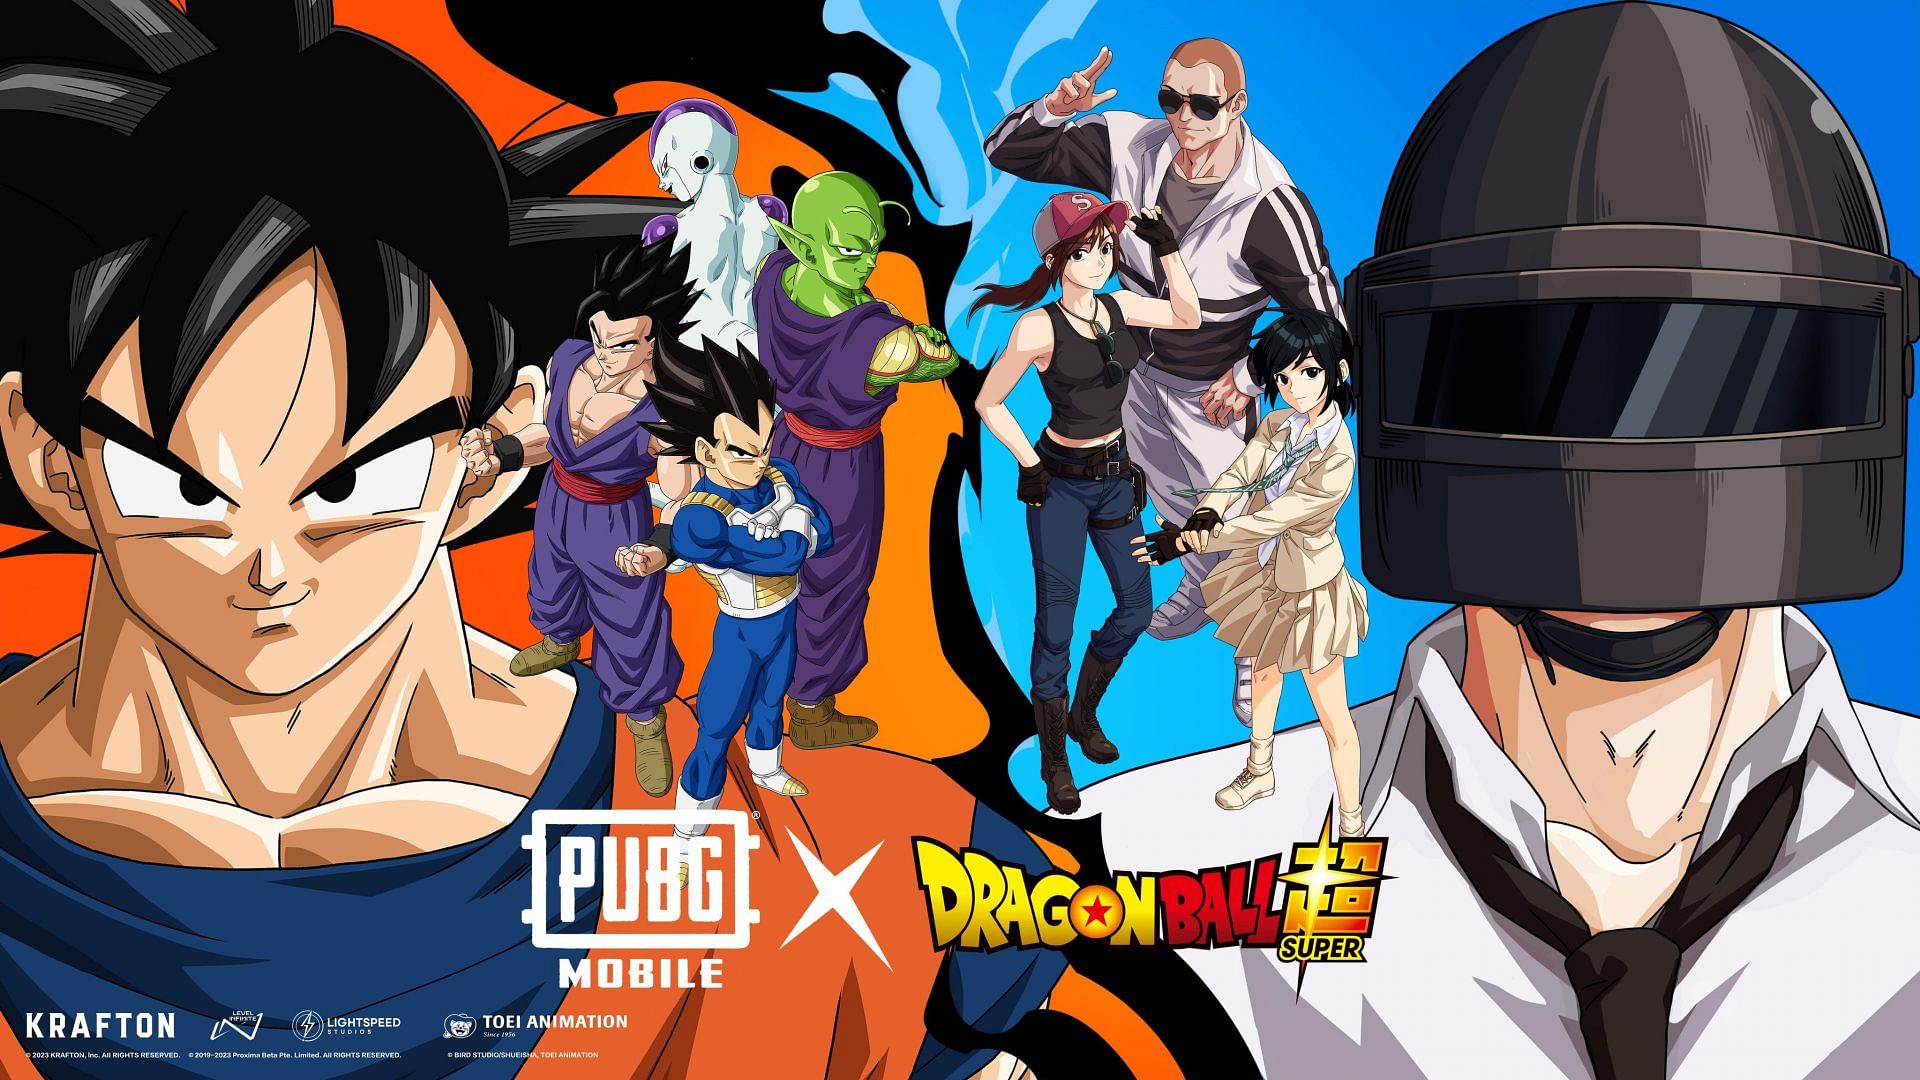 New Dragon Ball-themed gameplay and release date revealed by PUBG Mobile